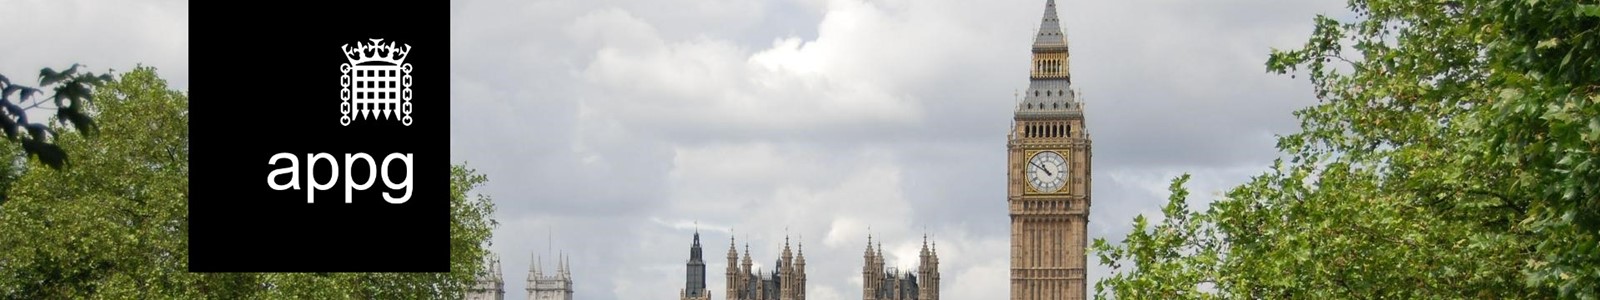 Image of Westminster Abbey, London, overlaid with APPG logo.